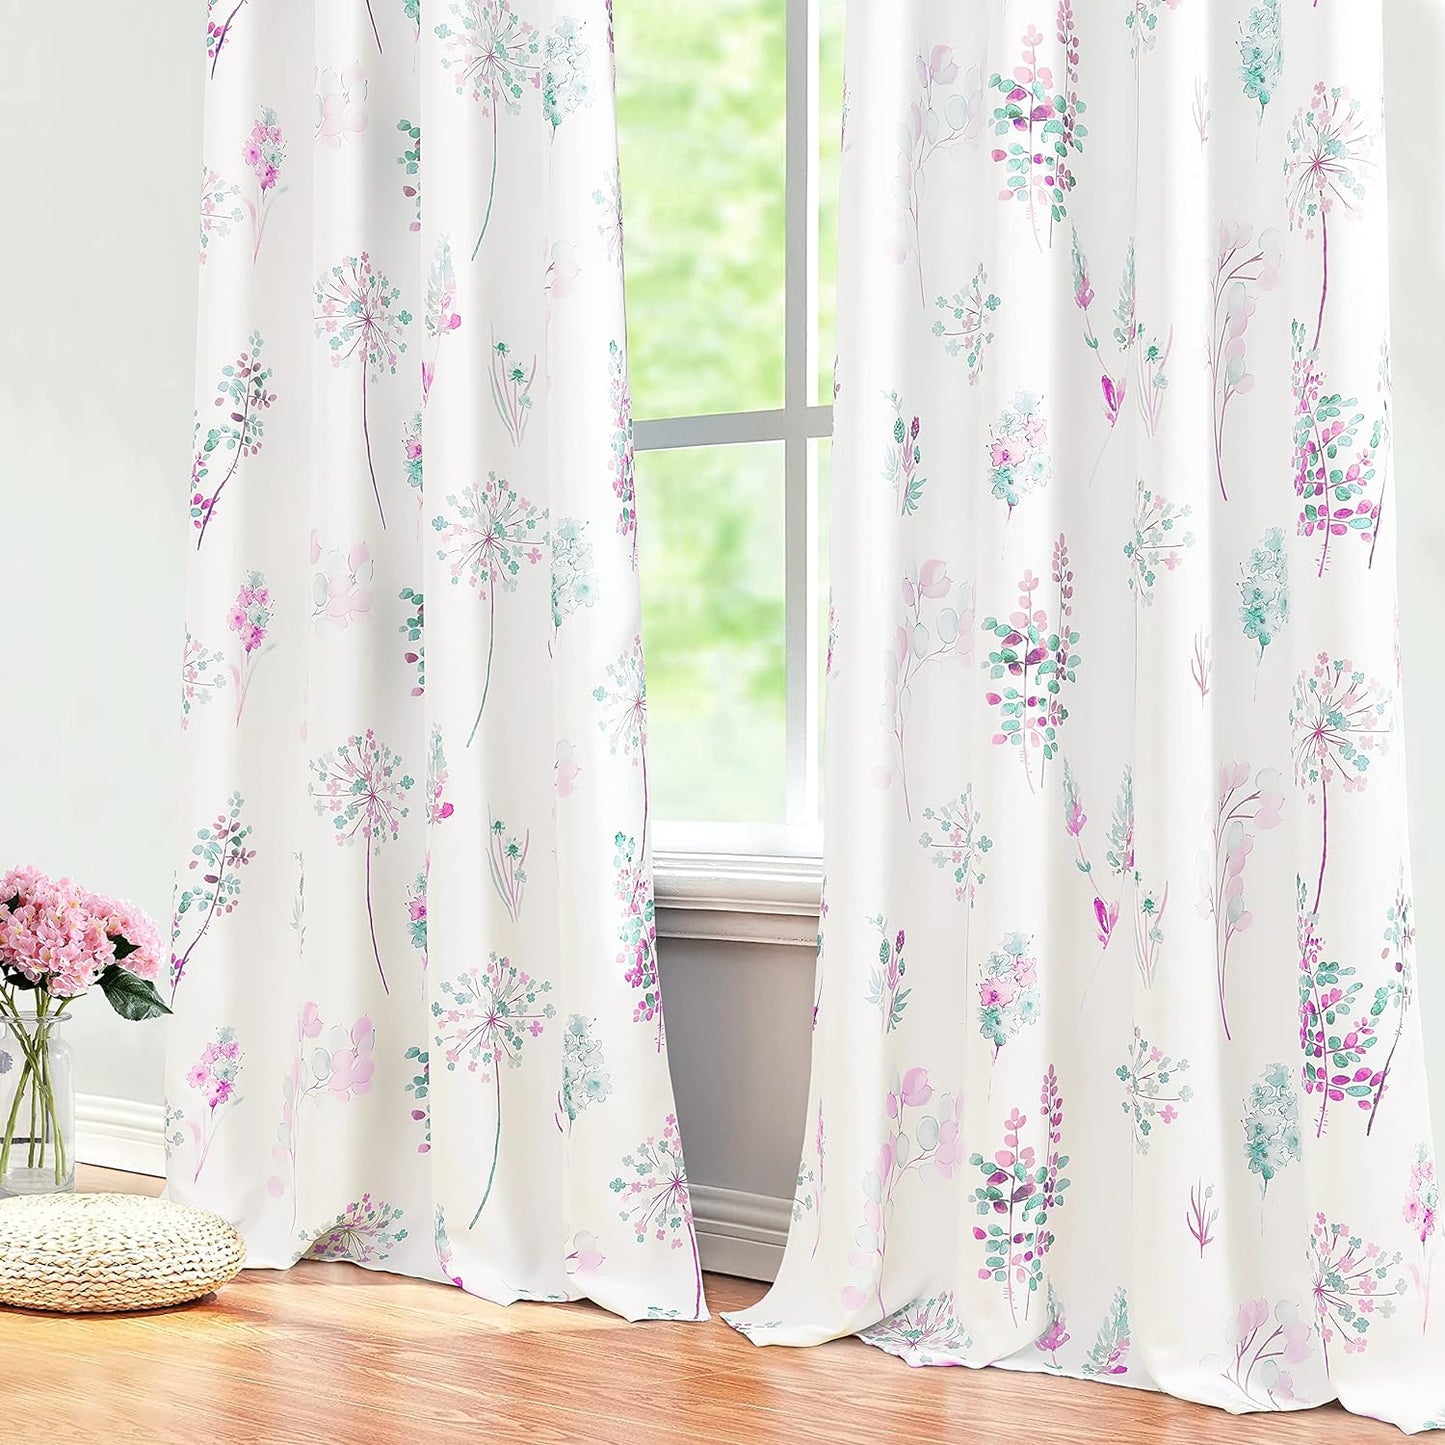 XTMYI 63 Inch Length Sage Green Window Curtains for Bedroom 2 Panels,Room Darkening Watercolor Floral Leaves 80% Blackout Flowered Printed Curtains for Living Room with Grommet,1 Pair Set  XTMYI Purple  Aqua  Pink 52"X84" 